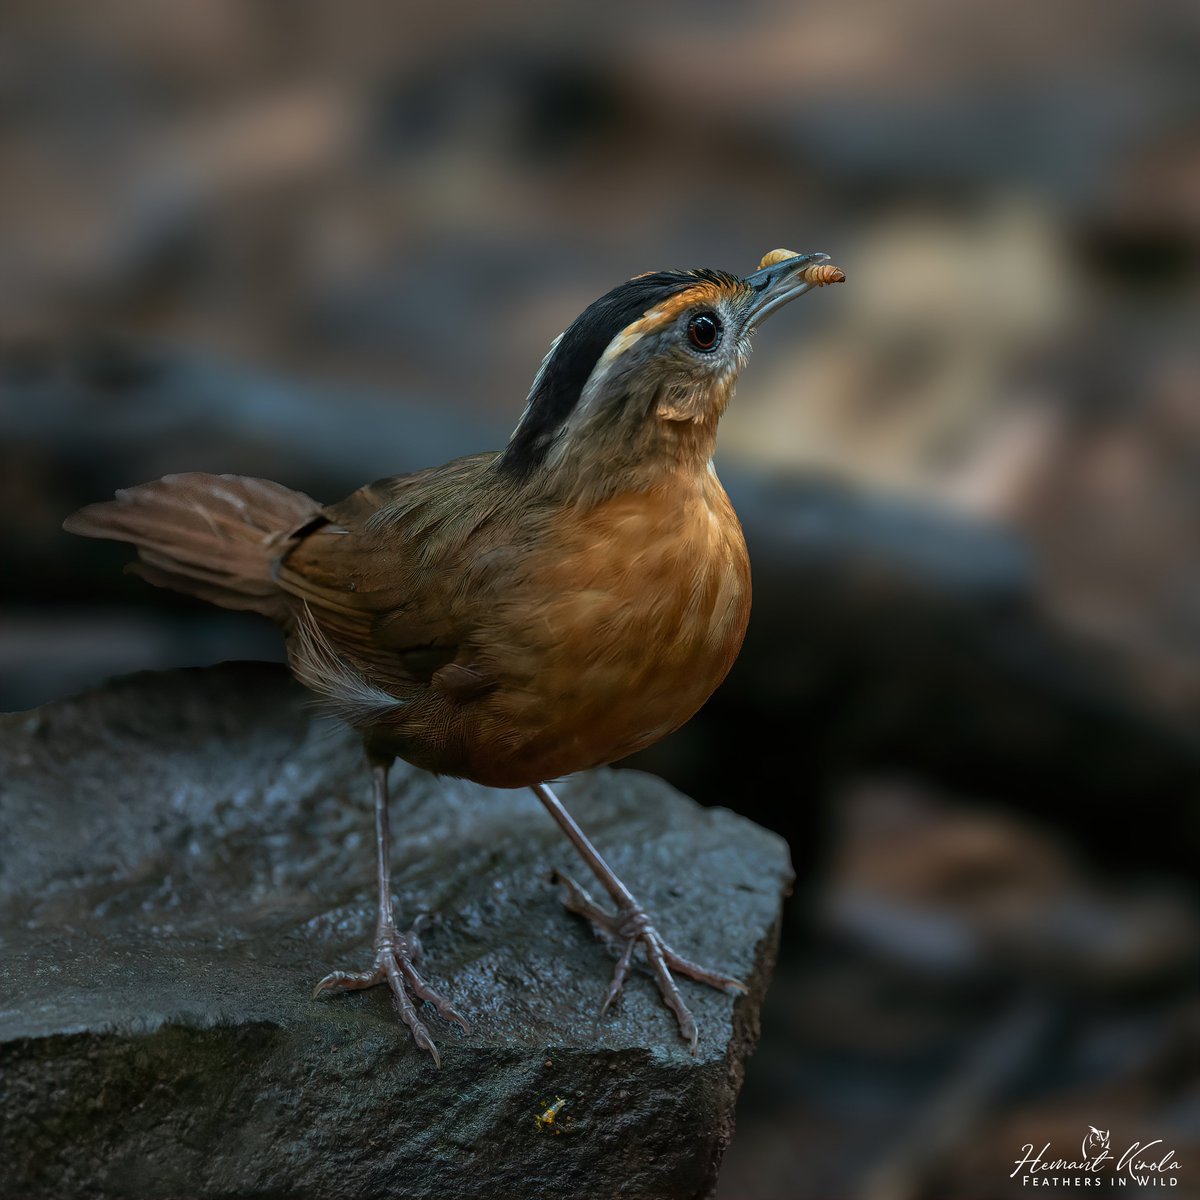 Our today's special 'Bird With the Food'. Let's fill the X with your bird pic with food. My lifer no. 1053 (out of 1057) Javan Black-capped Babbler #IndiAves #ThePhotoHour #BirdWithTheFood